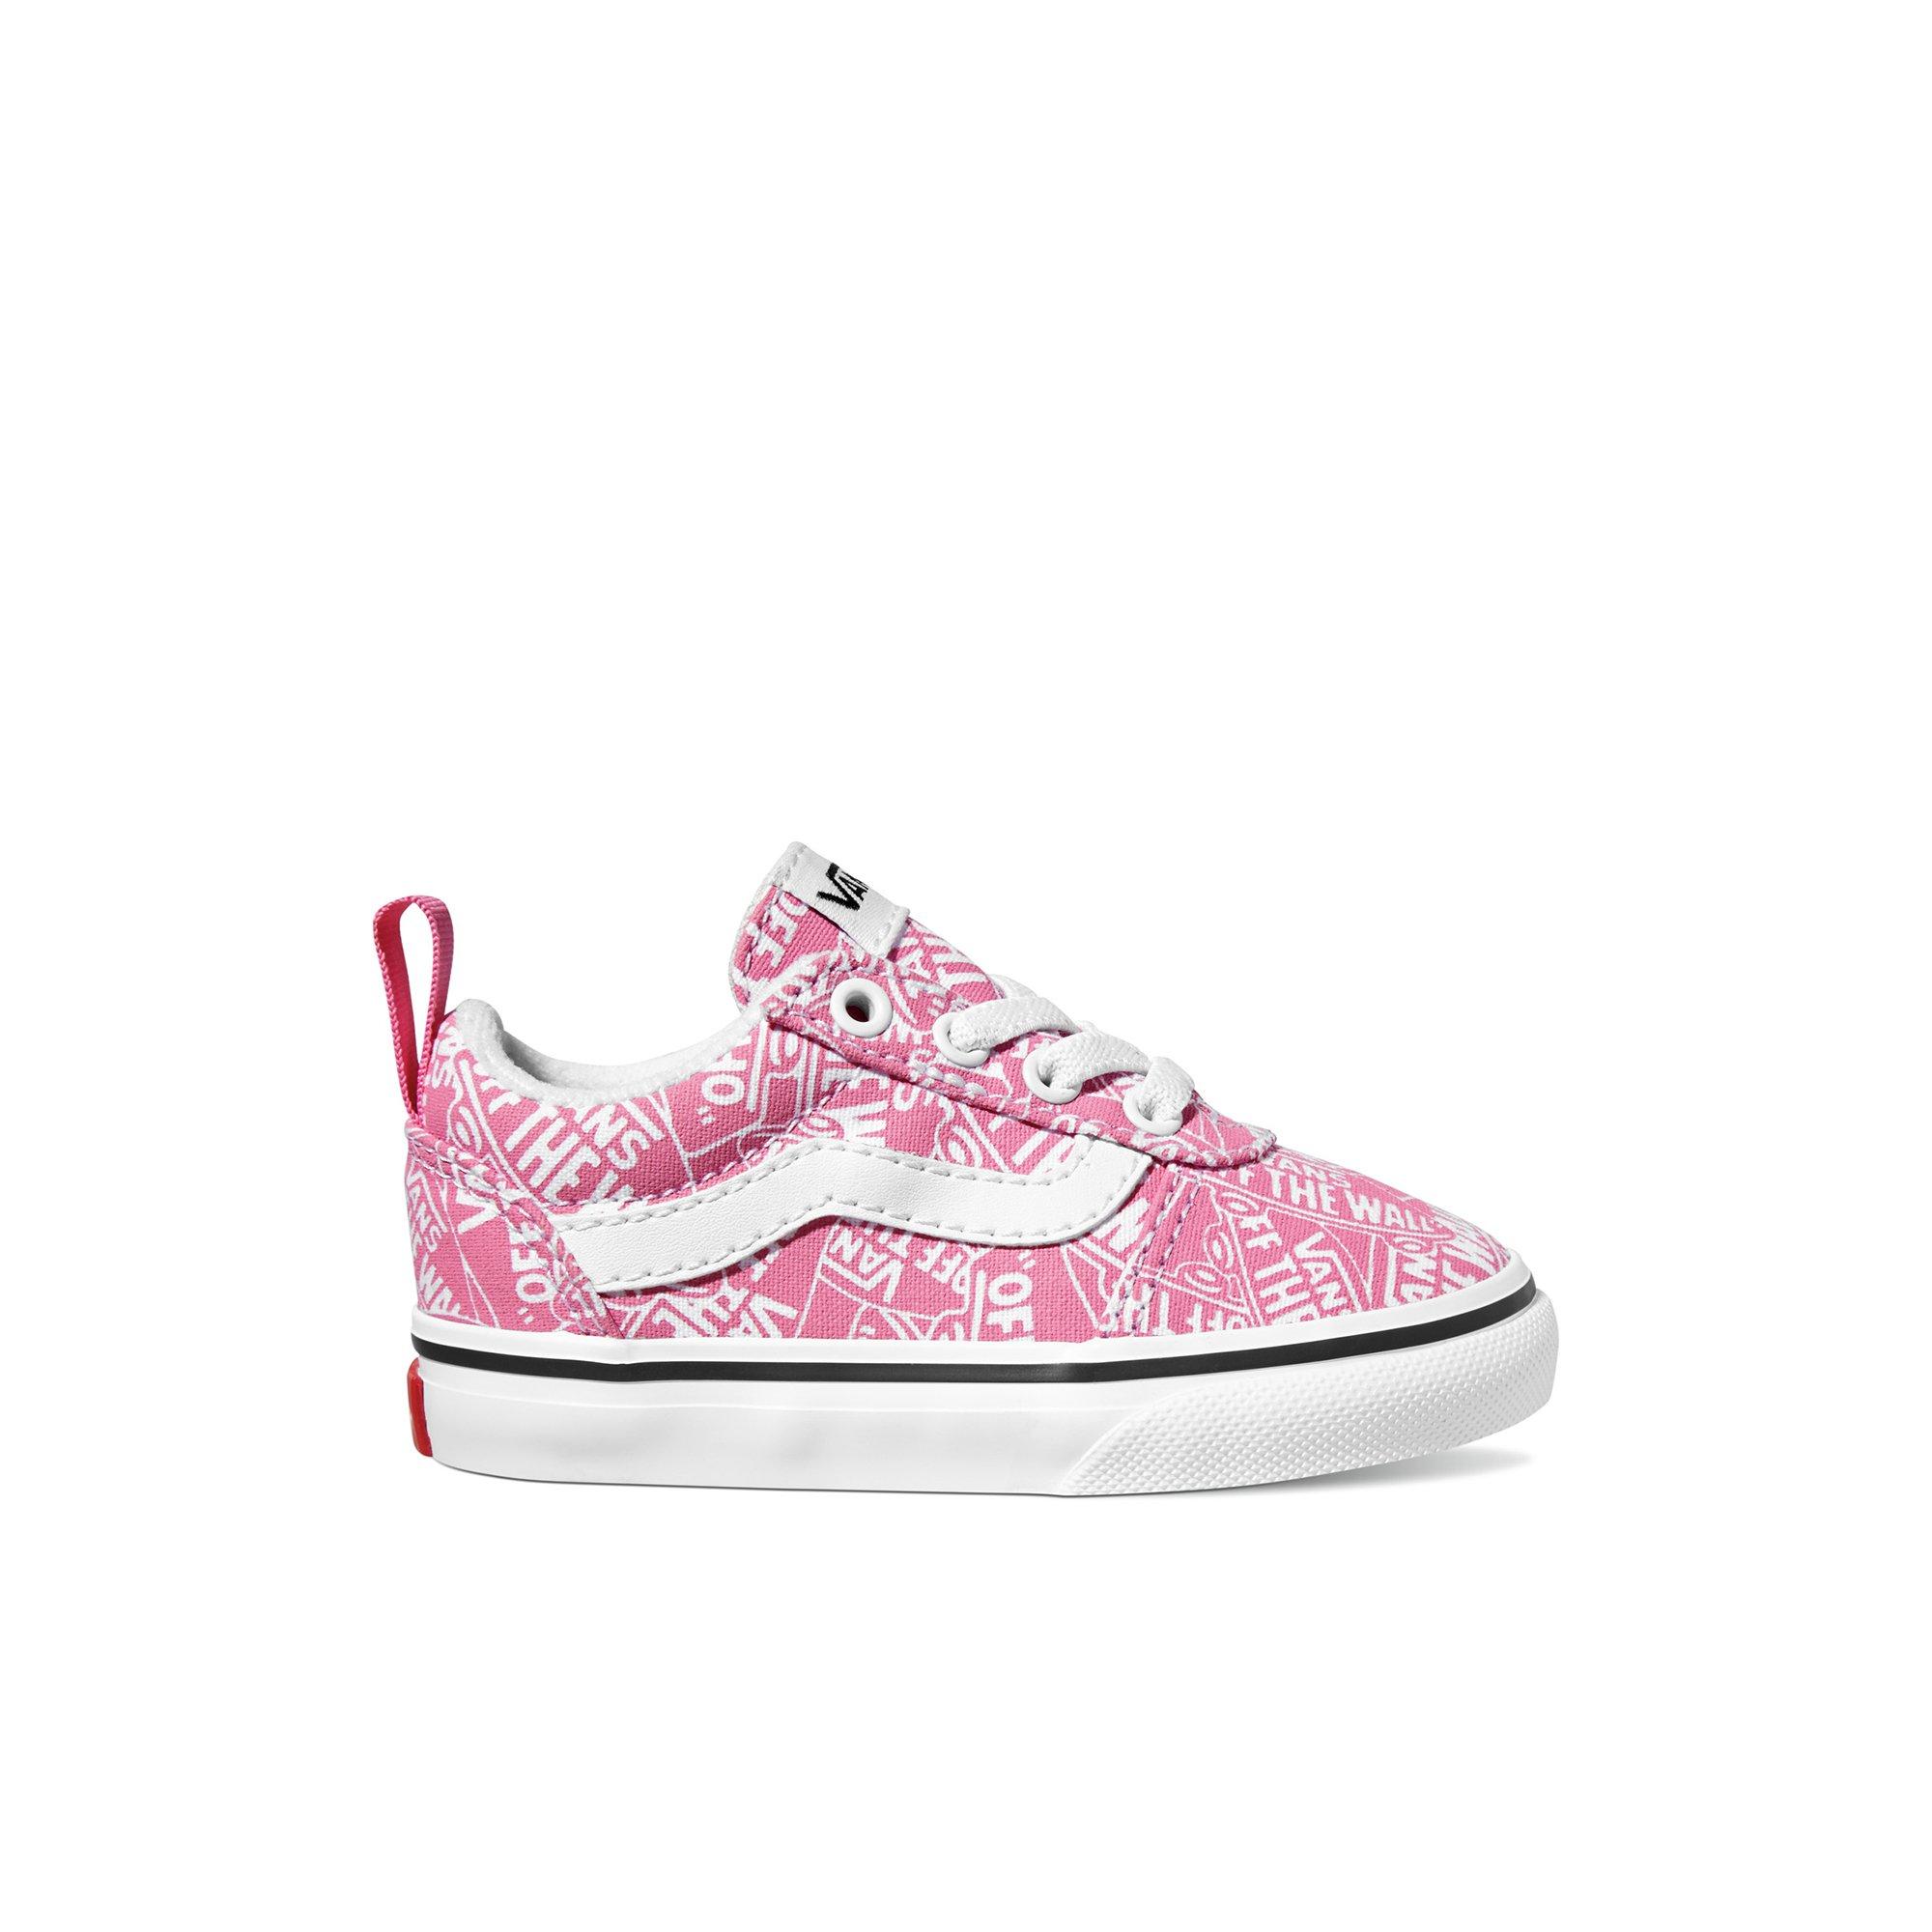 girls pink and white vans